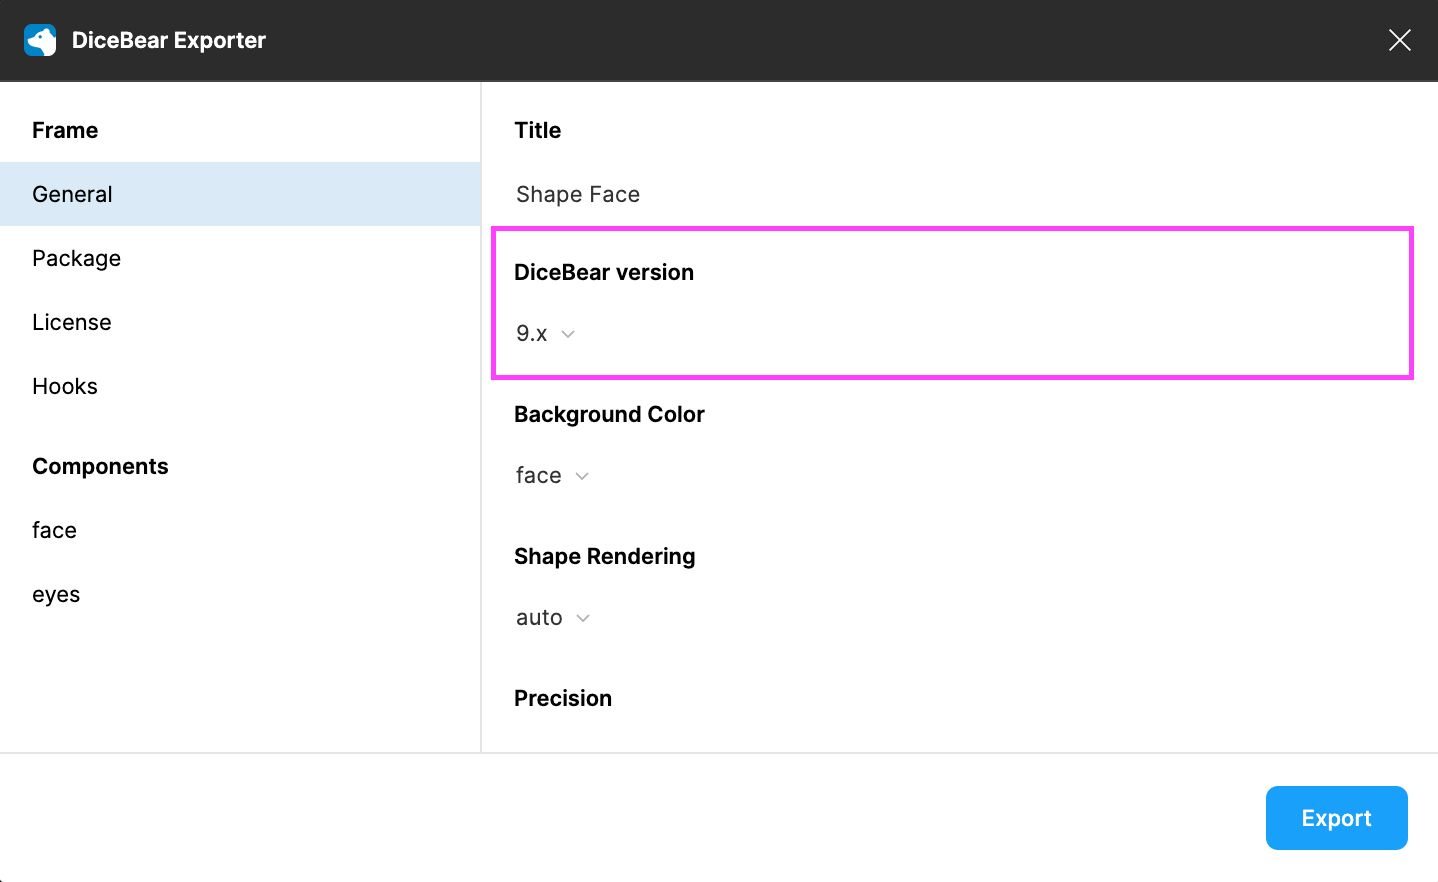 You can find the version option in the "General" tab